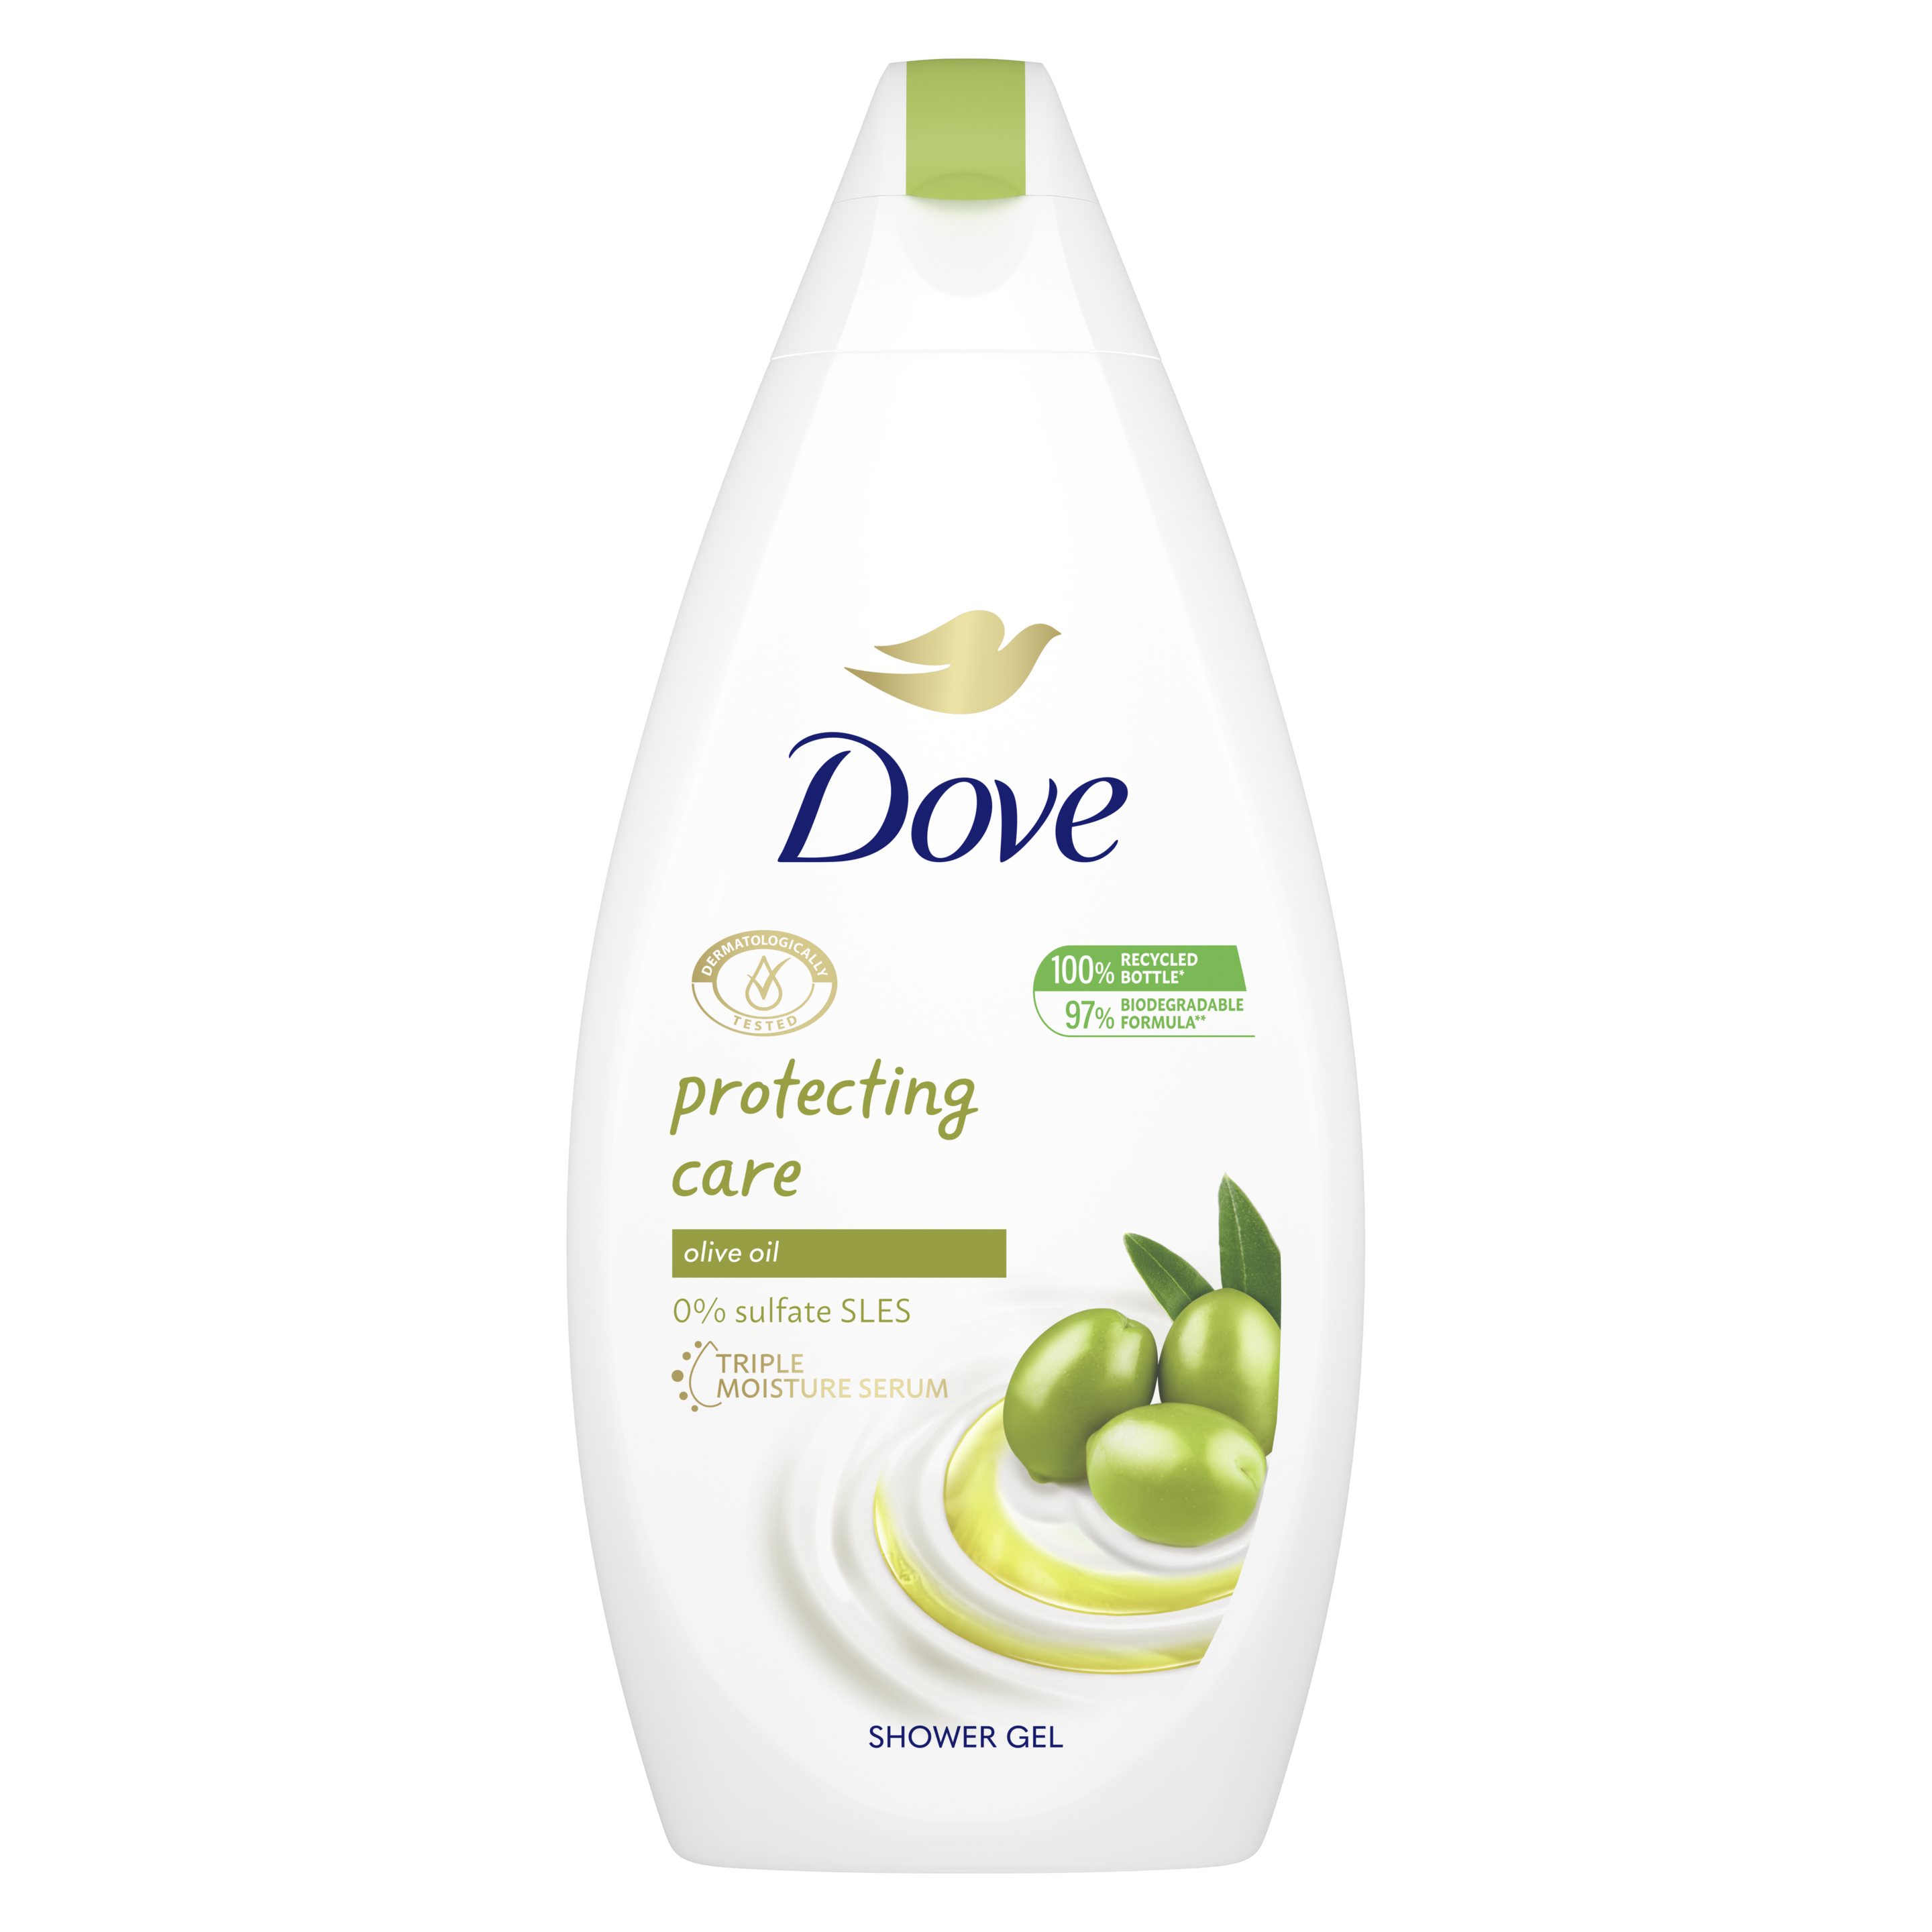 Dove Olive Oil Protecting Care Shower Gel 500ml